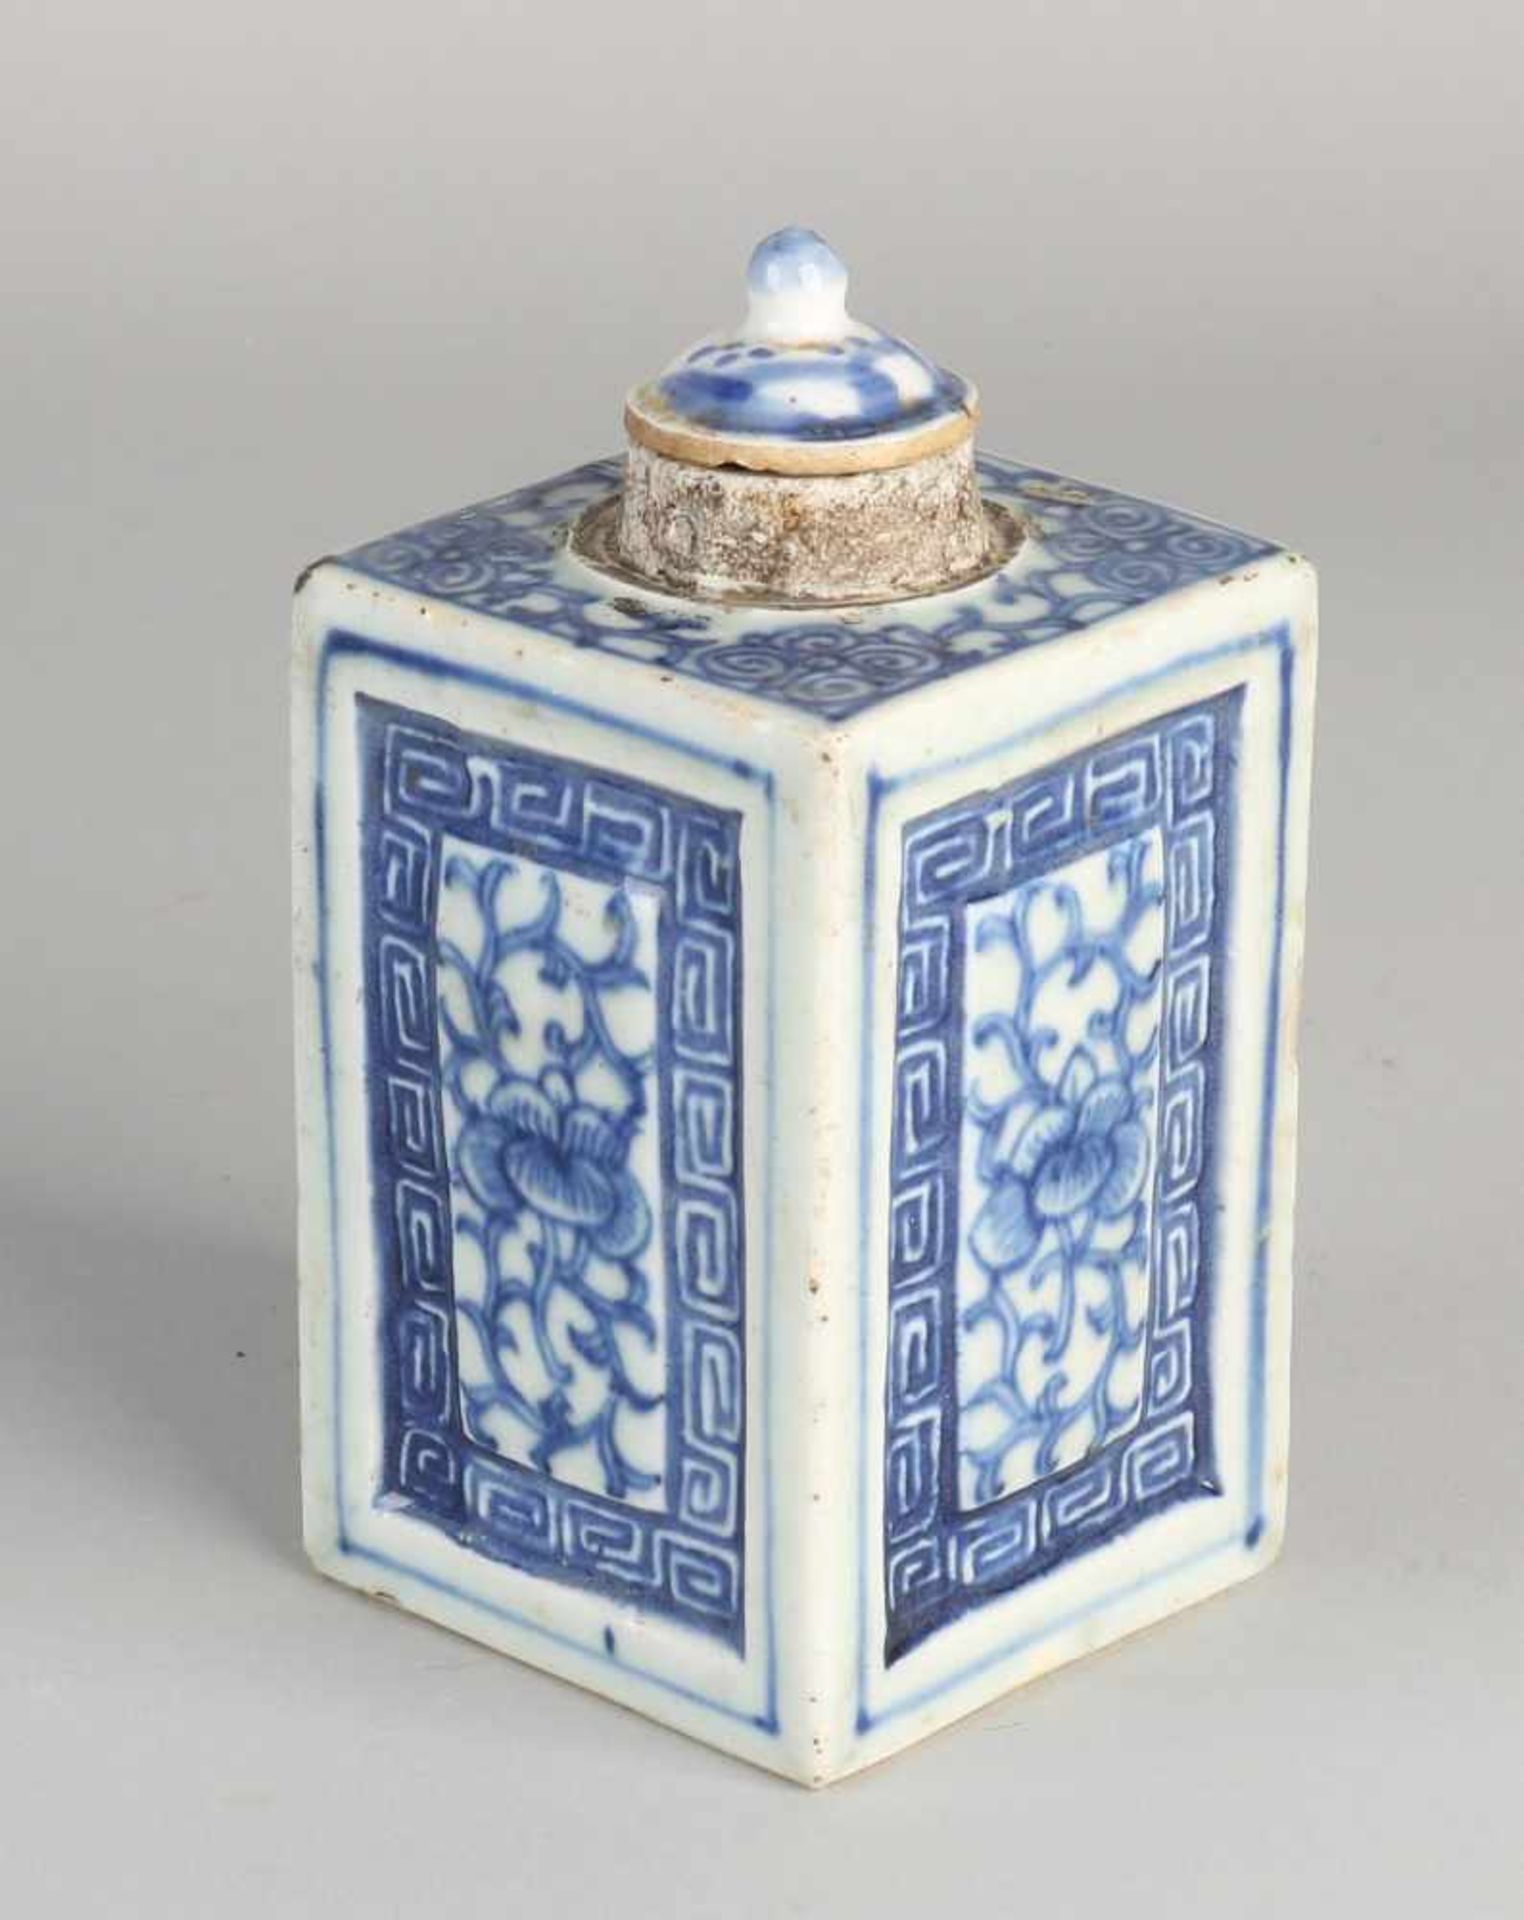 Chinese porcelain blue and white caddy with floral decor. Cover not original. Size: 13 x 7 x 7 cm.